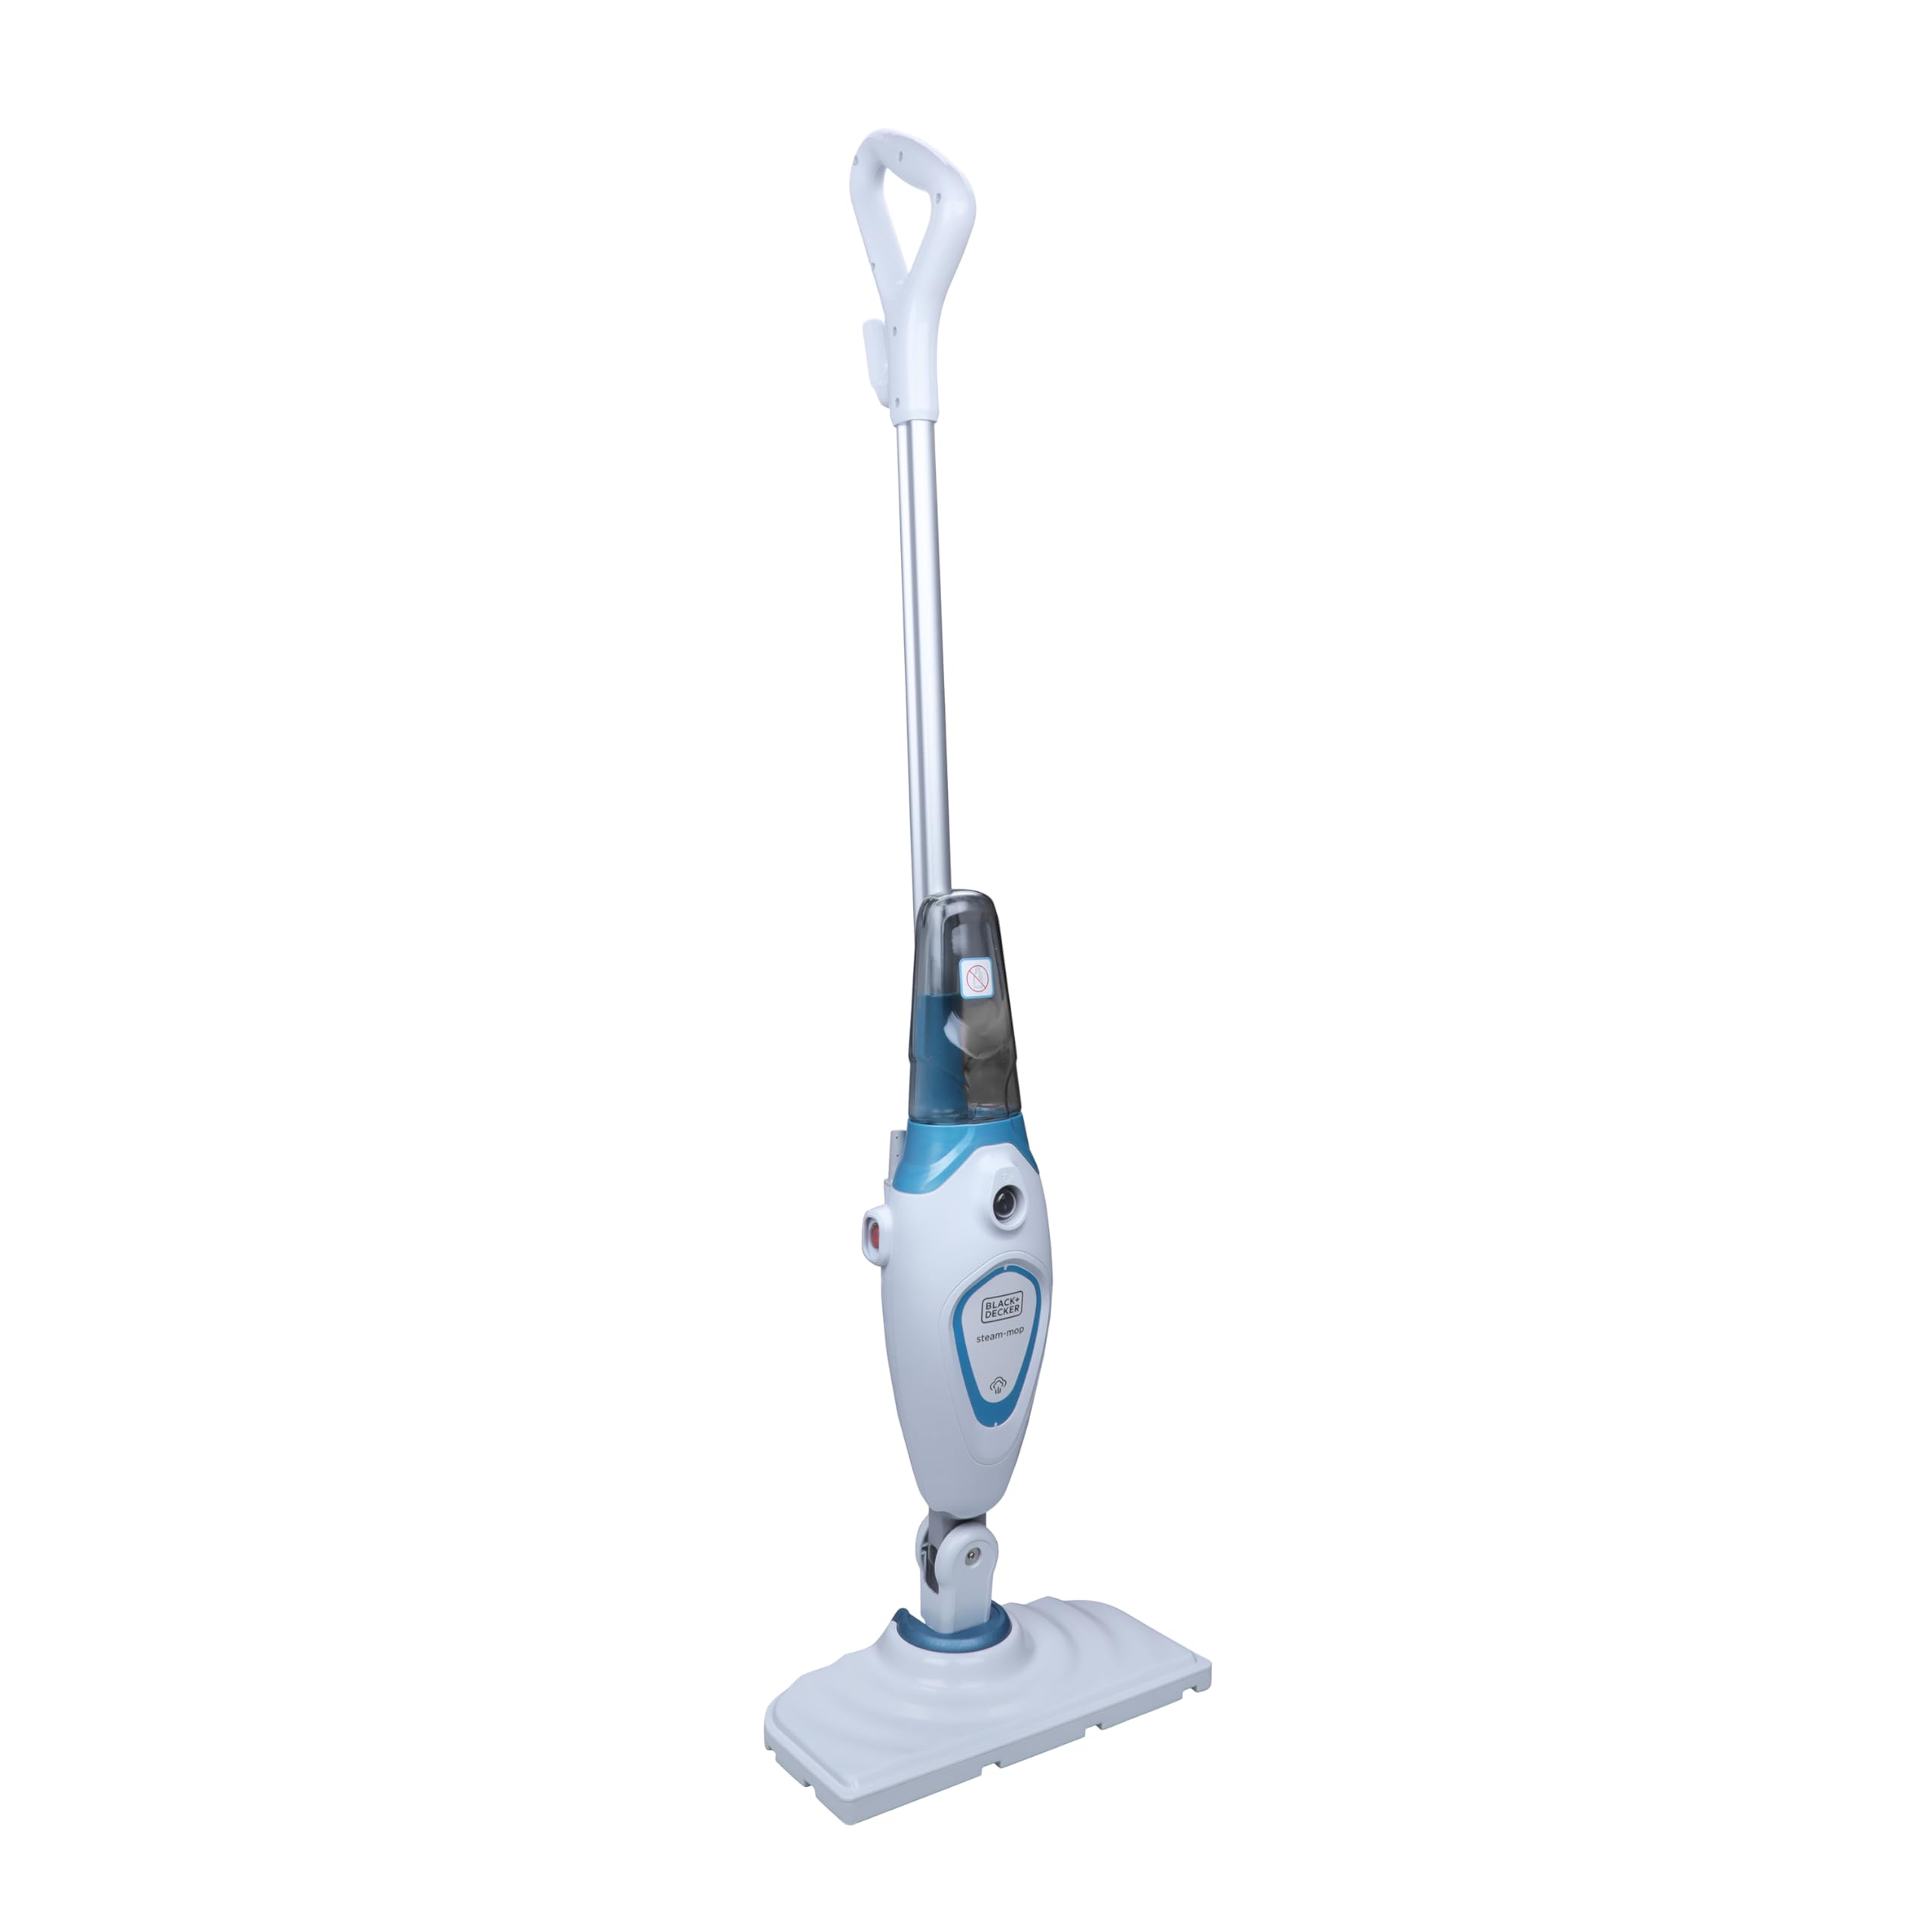 BLACK+DECKER 1300W 350ml Steam Mop With 5m Cord length and 20sec Heat Up Time That Kills 99.9% Germs+Super Heated For Quick Easy Cleaning Sanitizes Surfaces FSM1605-B5